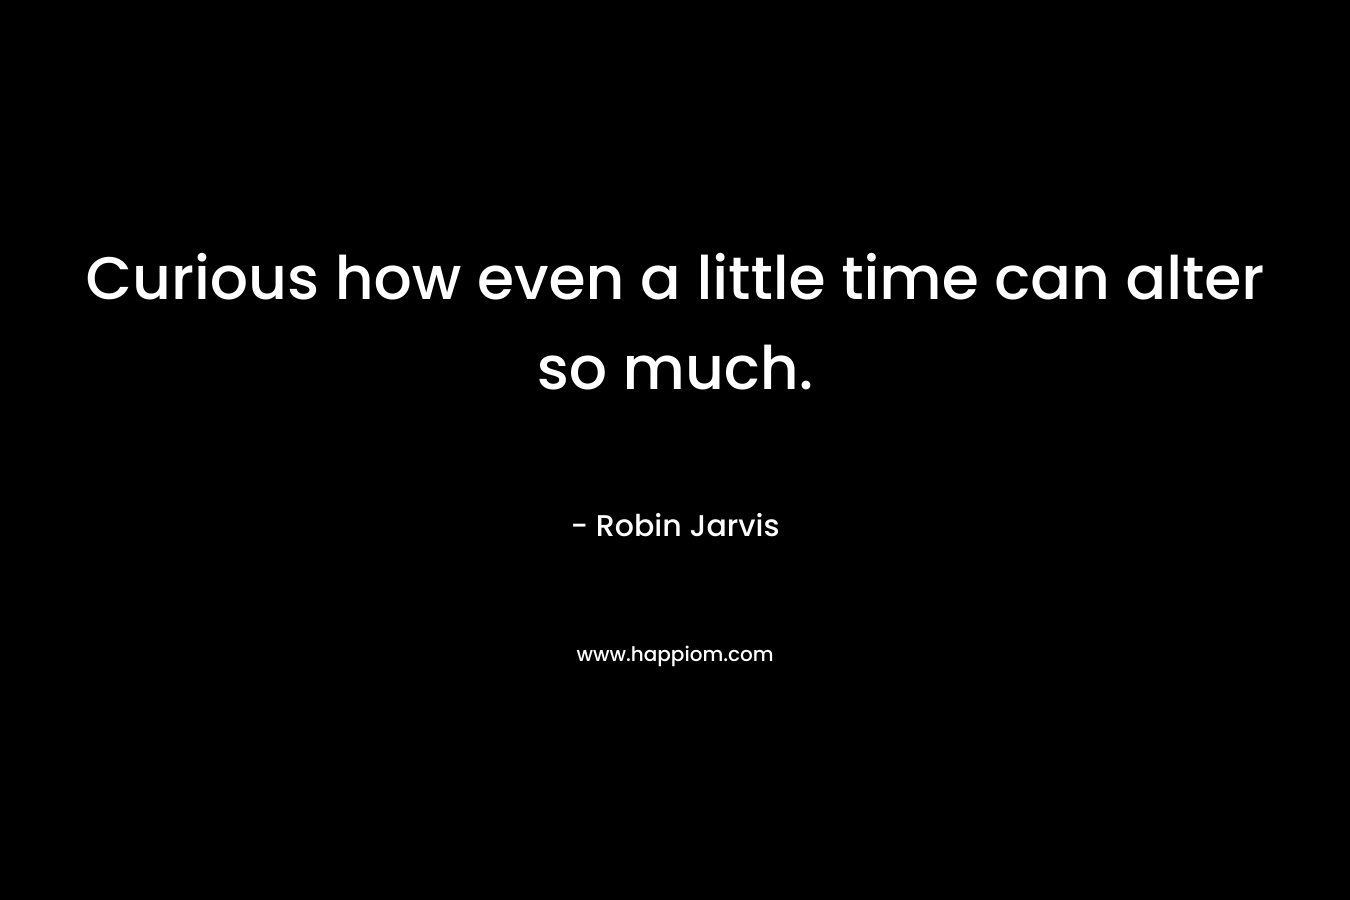 Curious how even a little time can alter so much. – Robin Jarvis